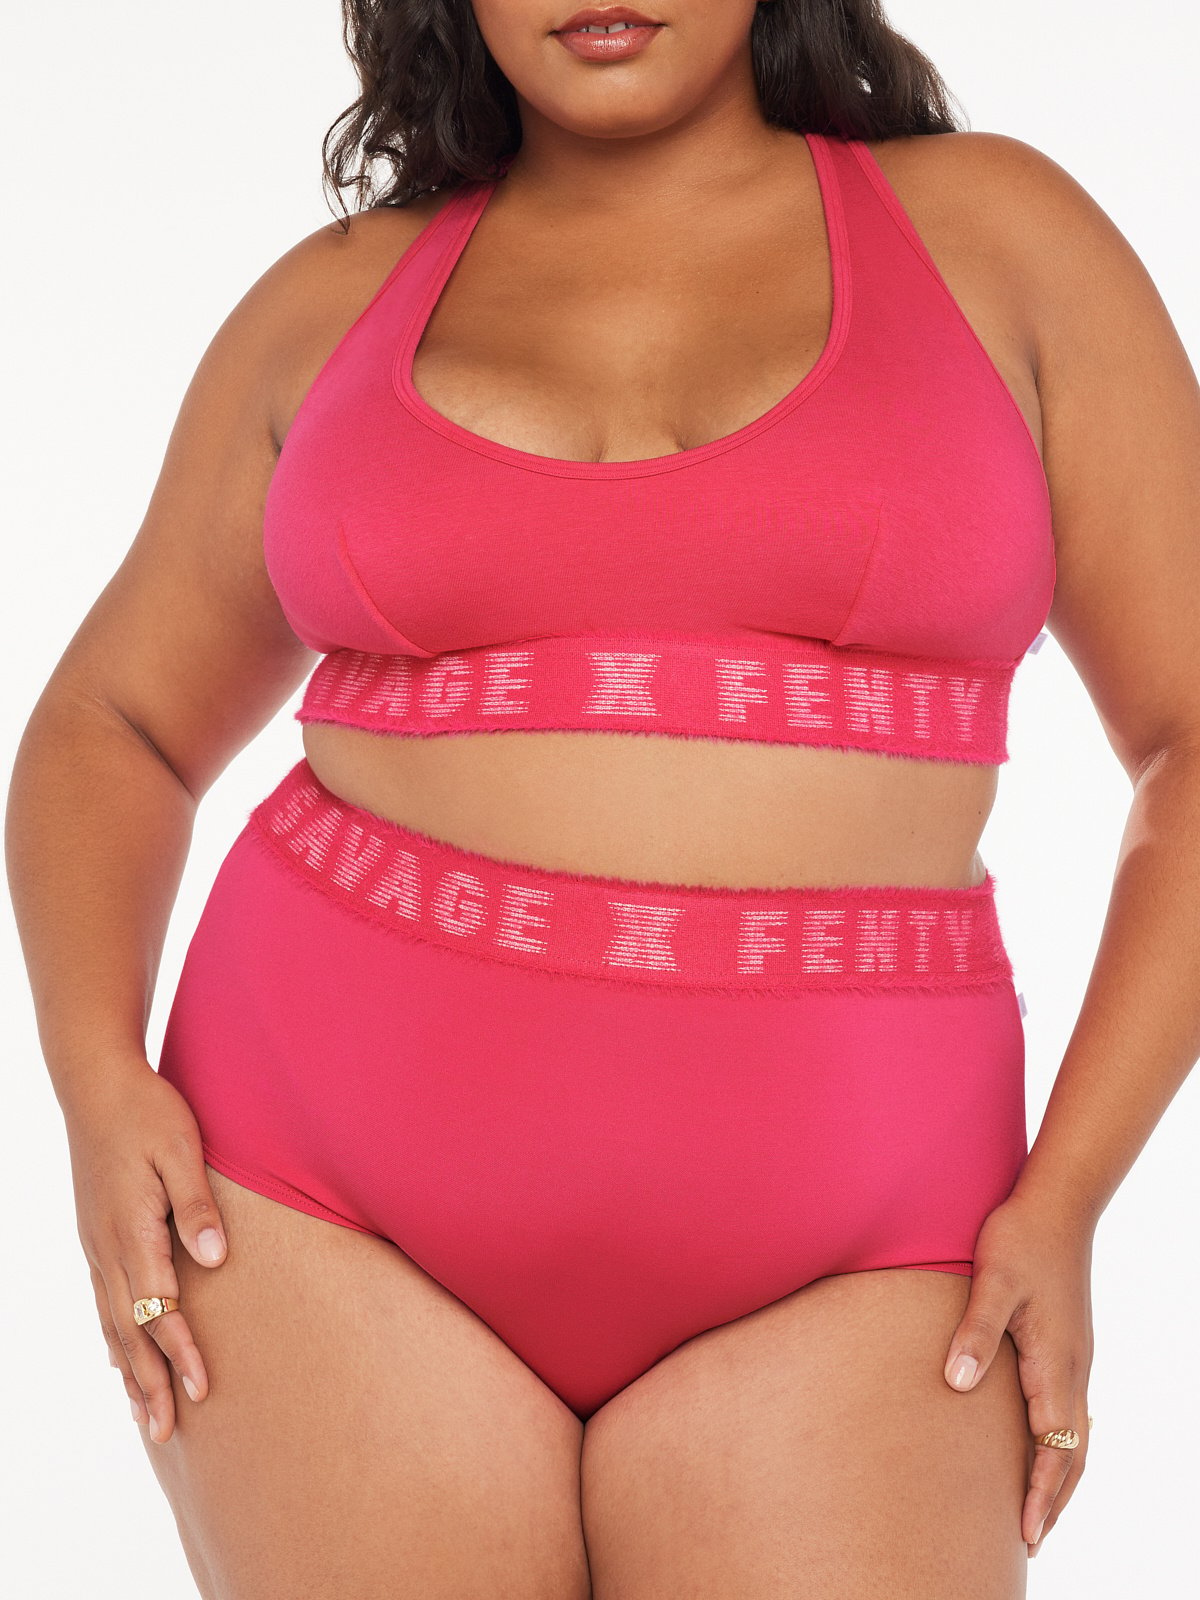 CLF Forever Savage Cheeky Booty Short in Pink